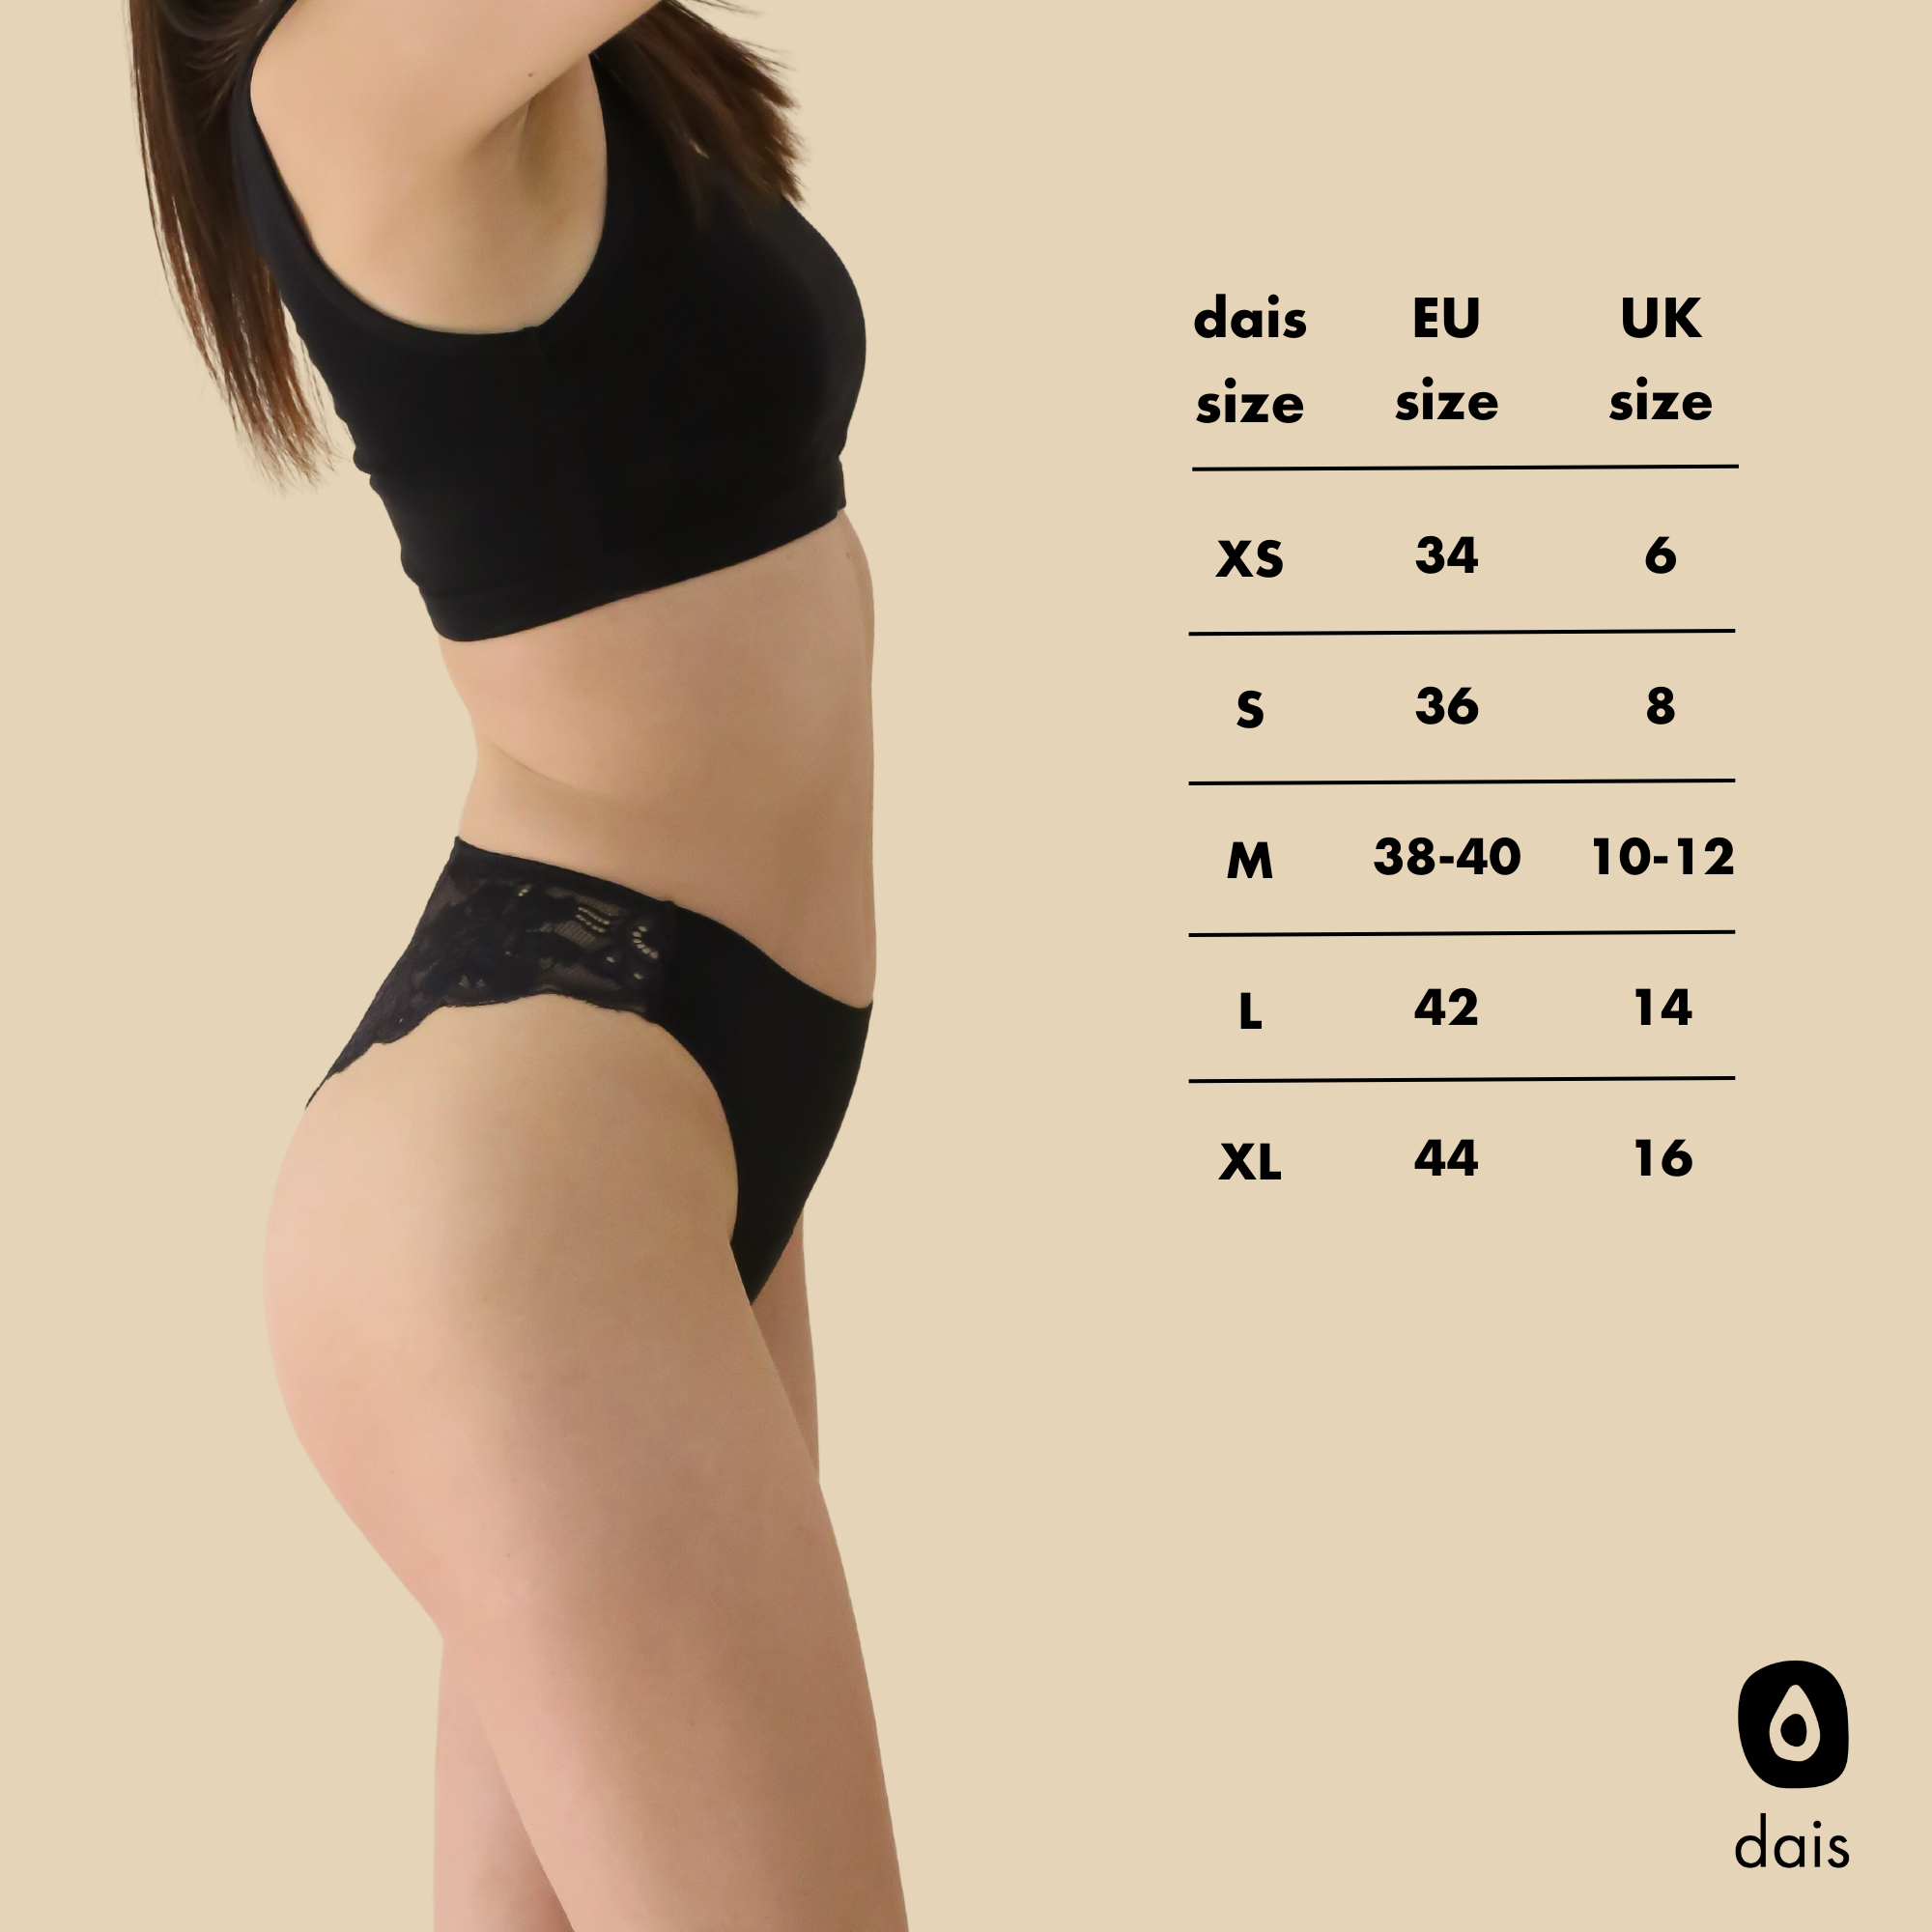 Size chart dais daily underwear in brazilian lace available in sizes XS, S, M, L, XL with EU and UK size conversions. 